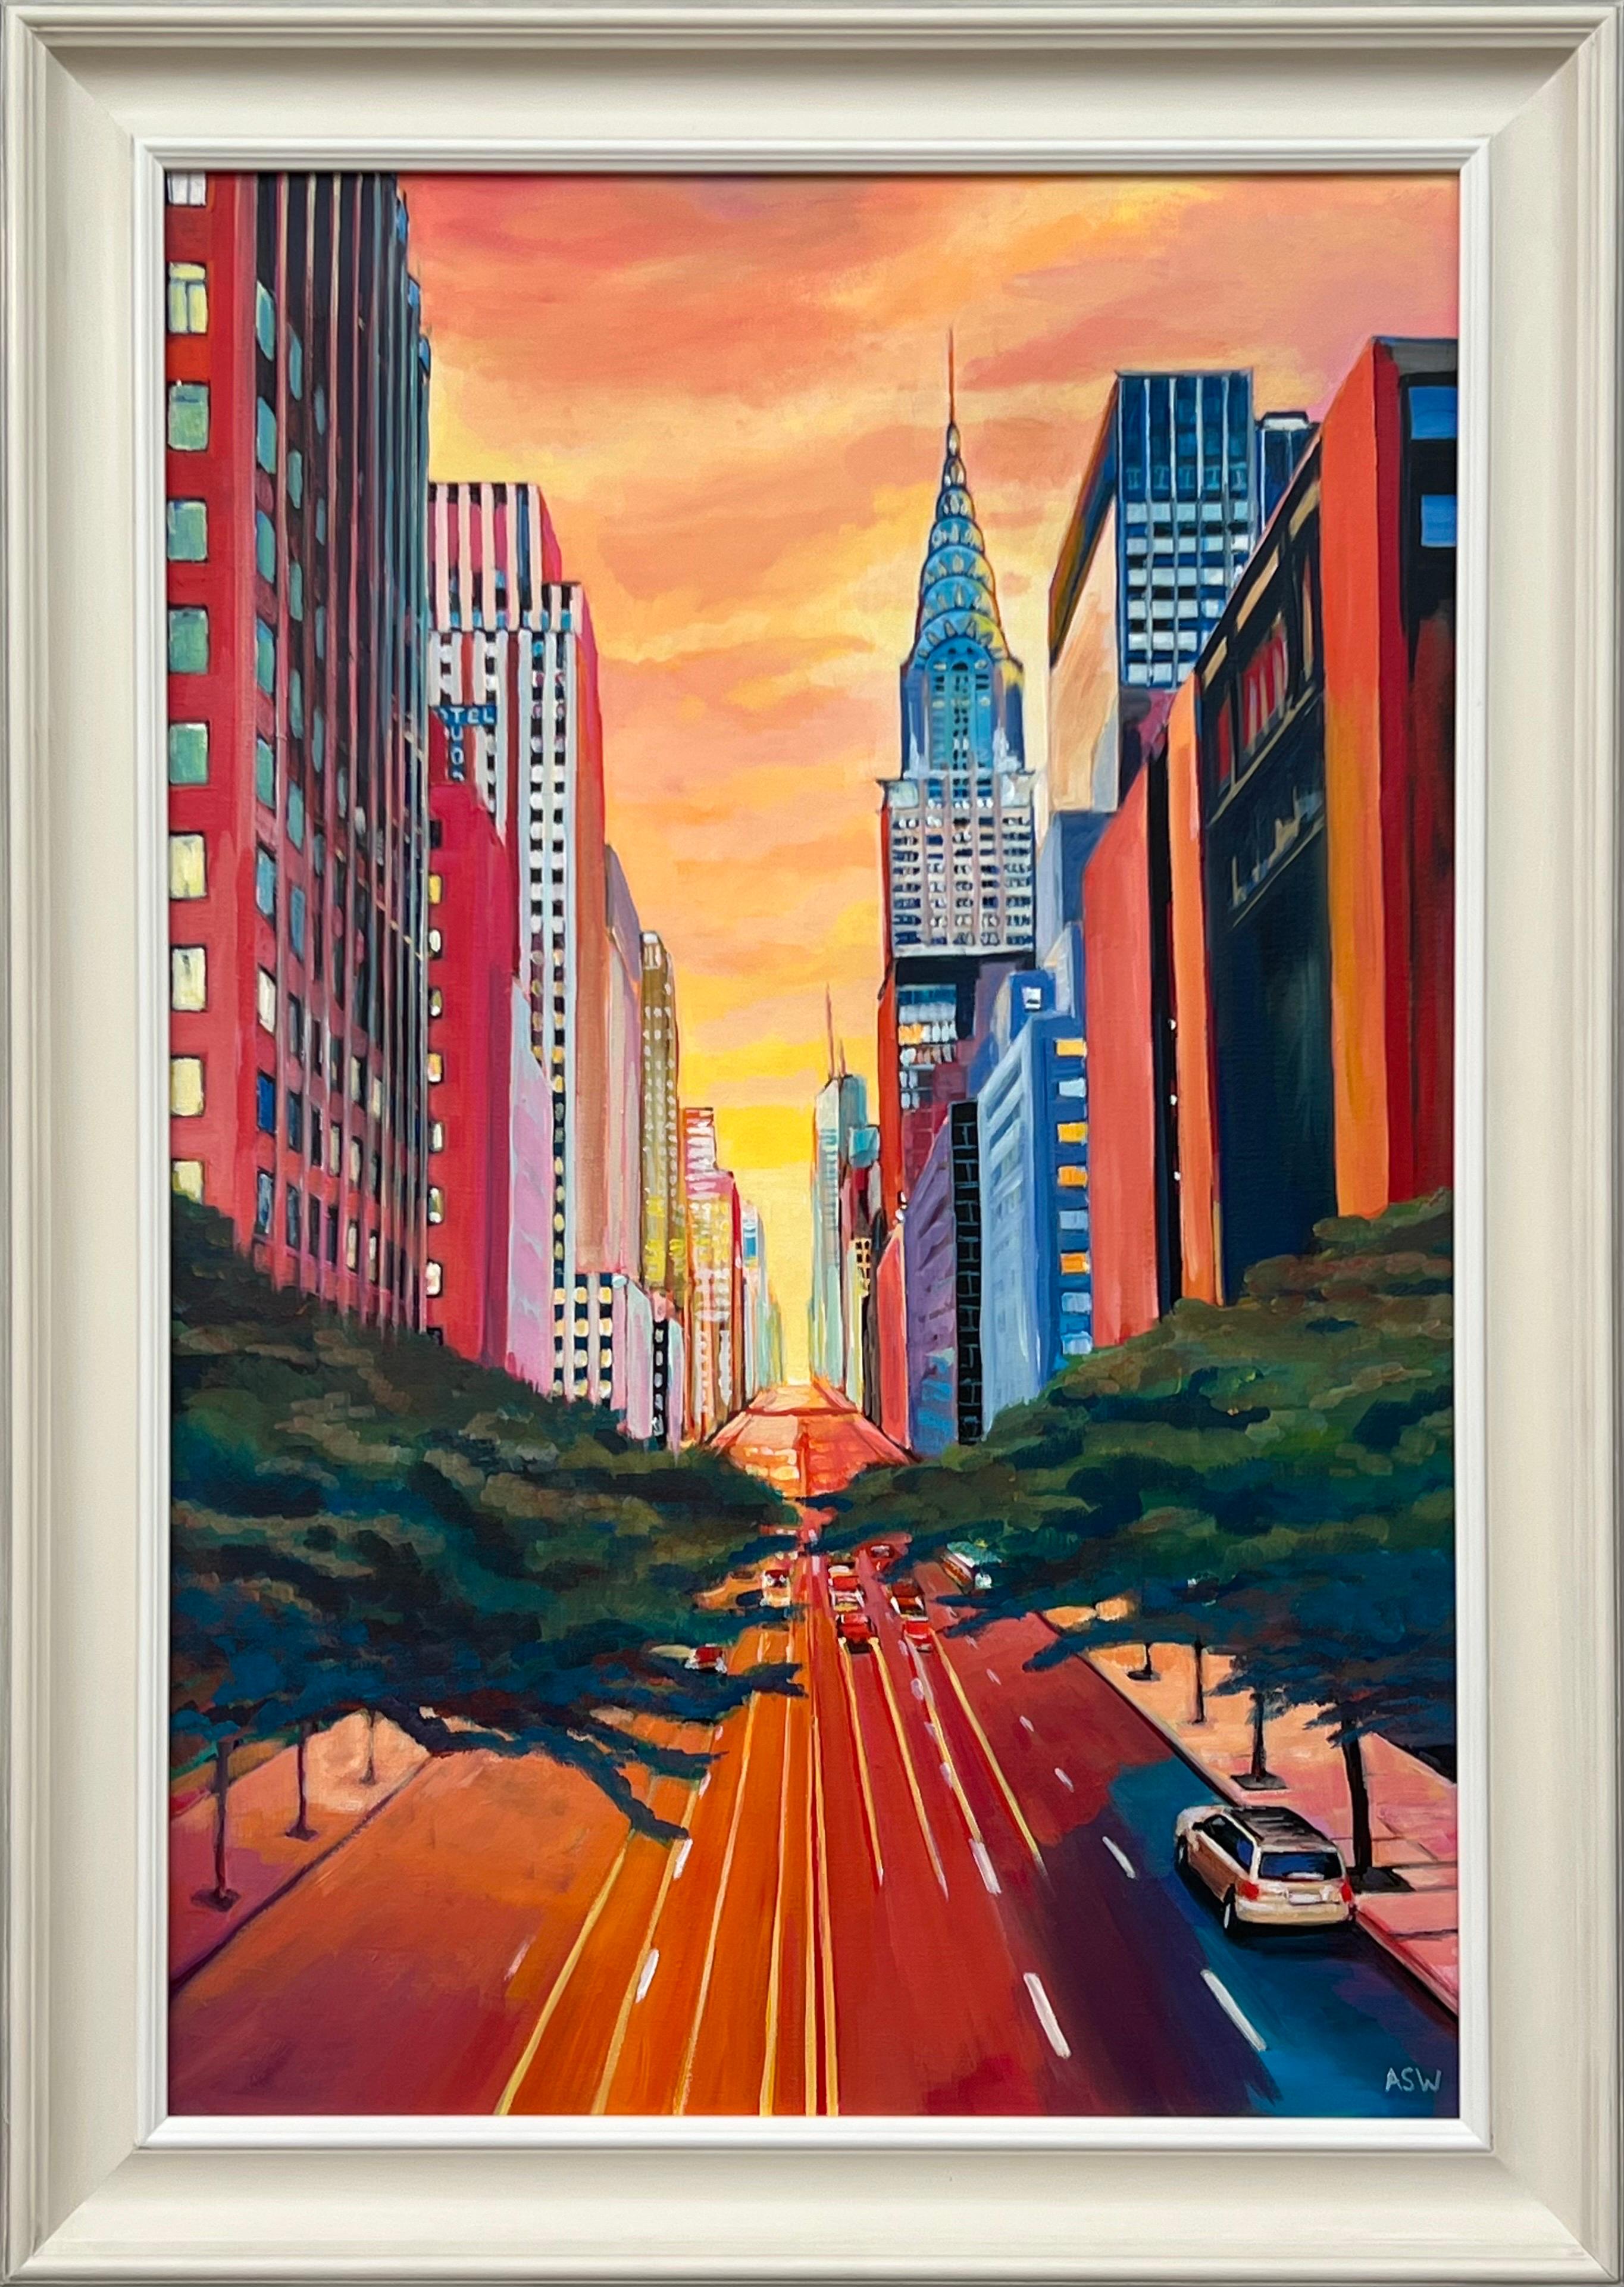 Angela Wakefield Figurative Painting - Painting of the Chrysler Building 42nd Street New York City by British Artist